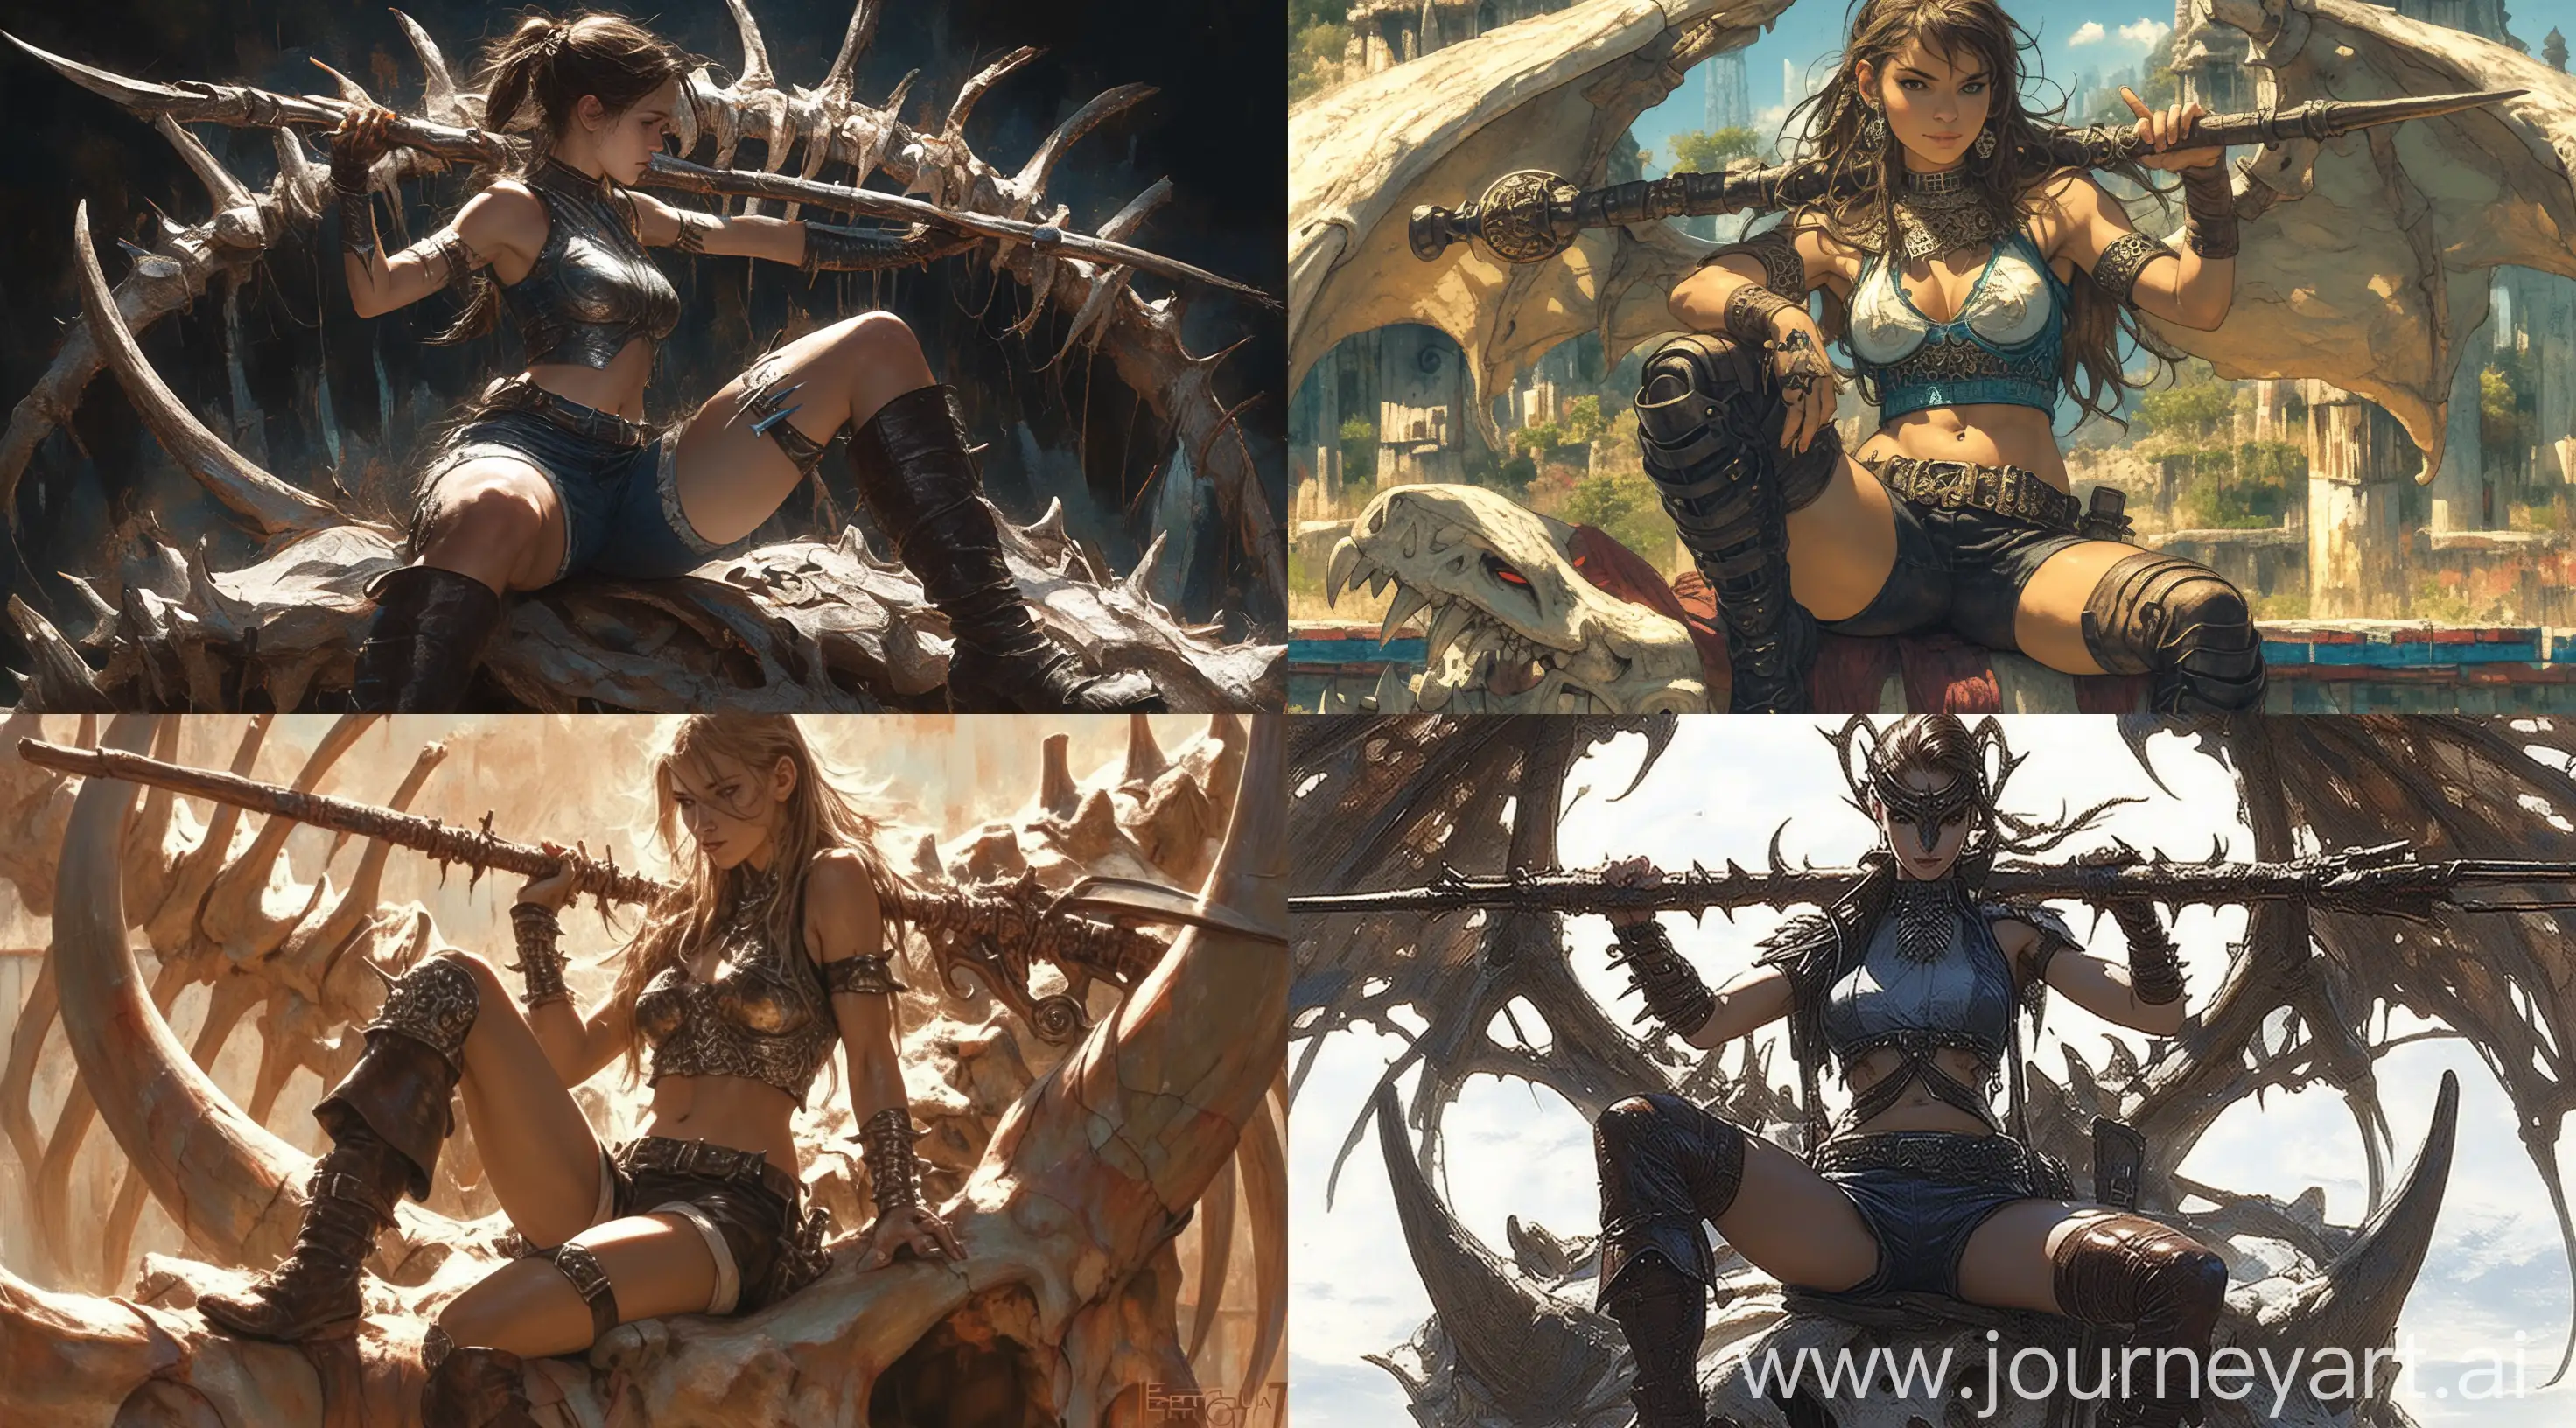 Exquisite-Women-Warrior-QueenPirate-with-Metal-Armor-Inserts-and-Fighting-Staff-on-Bone-Totem